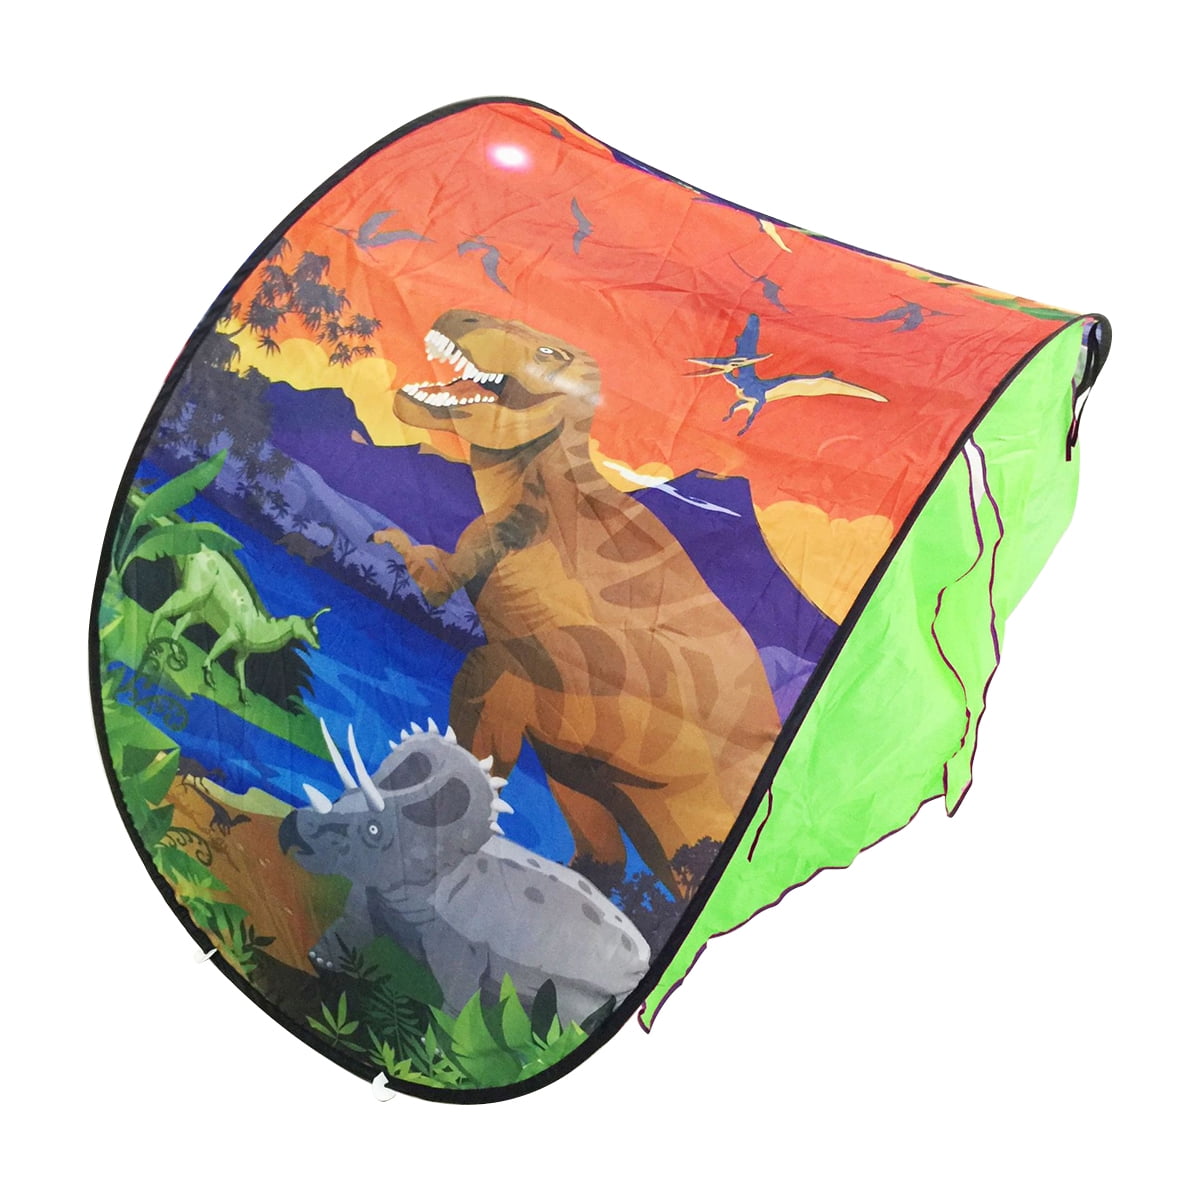 Dinosaur Island Dream Tents Pop-up Foldable Playhouse Kids Bed Tent Indoor Gift 